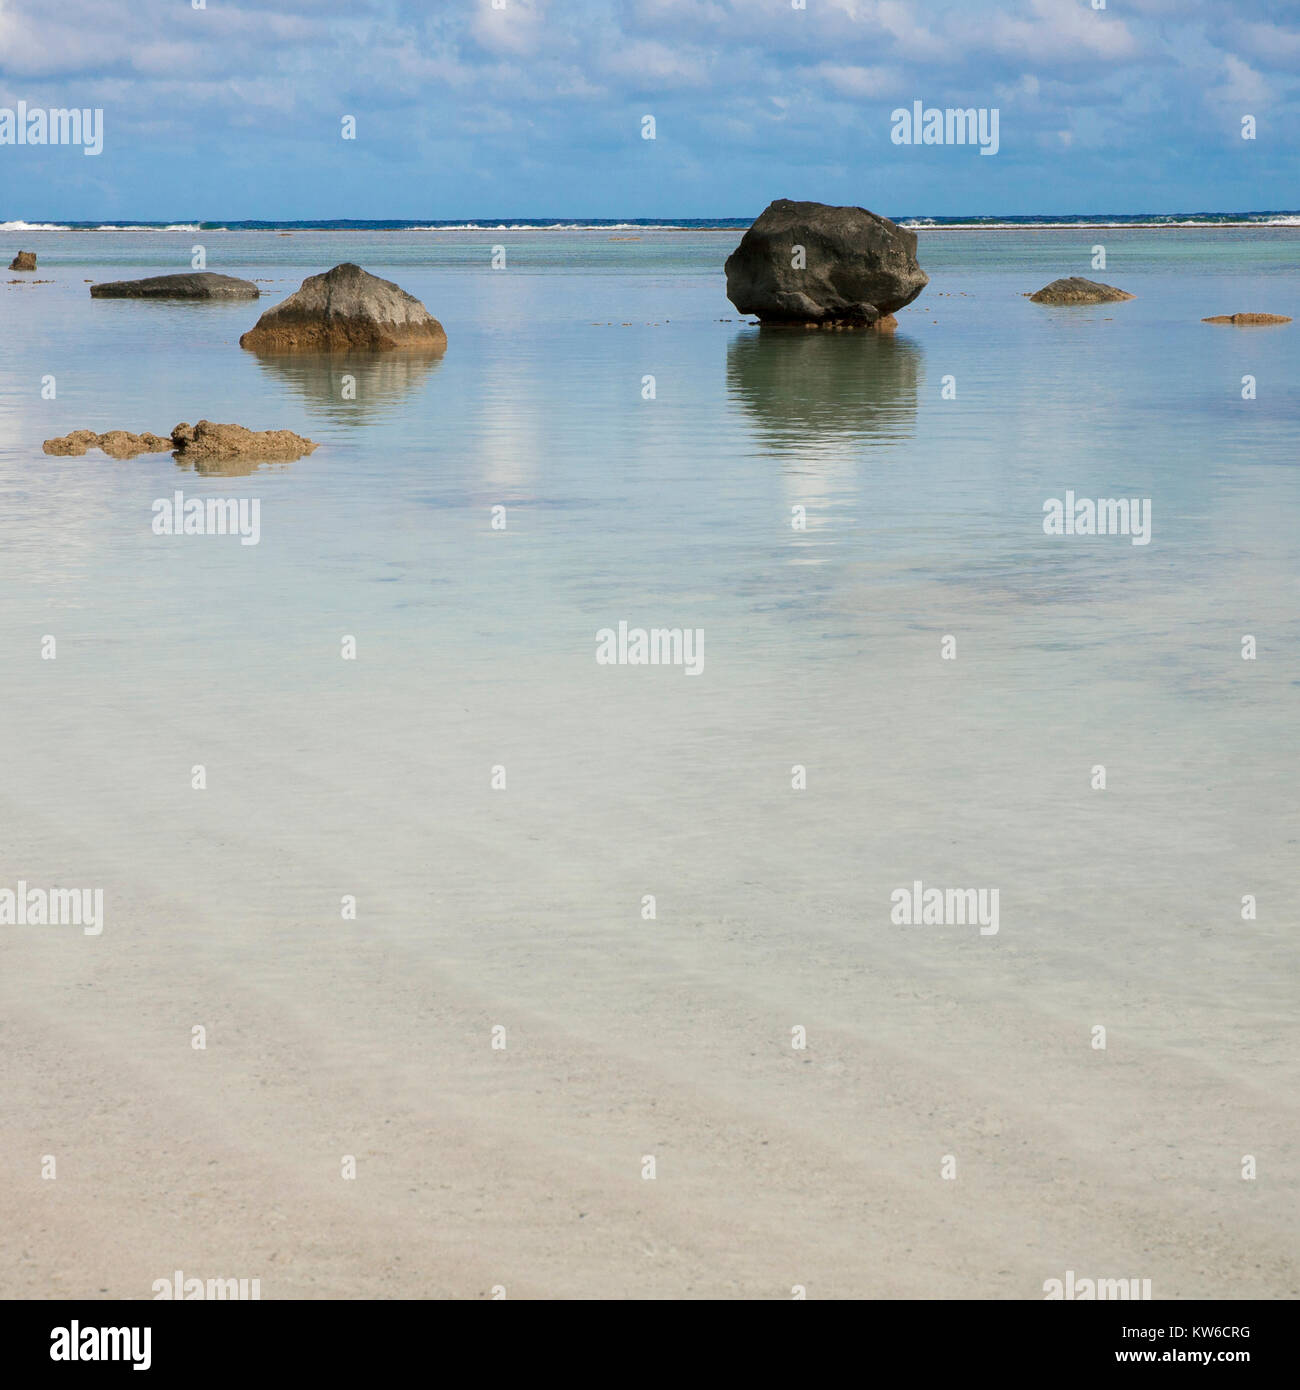 sun sea and sand scapes from the south pacific cook islands Rarotonga and one foot island with dramatic rock formations and reflections Stock Photo